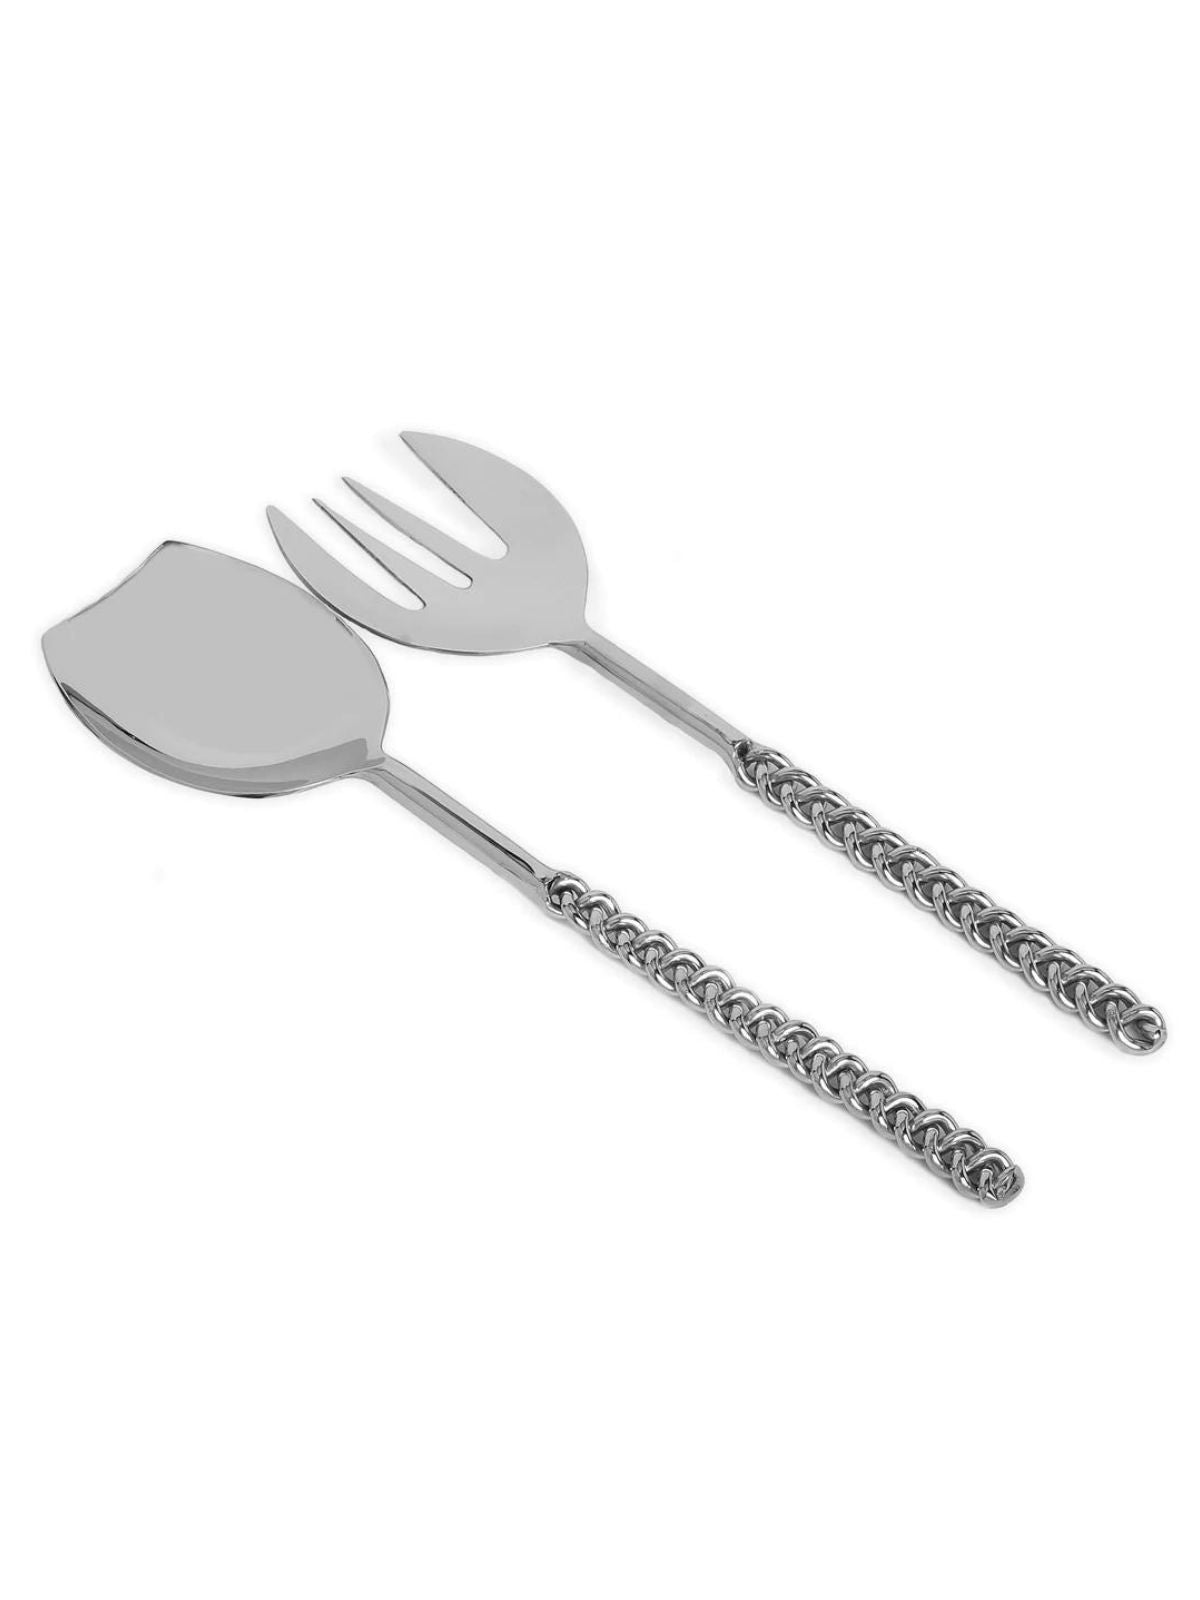 Set of 2 Salad Servers with Silver Twisted Handles Sold by KYA Home Decor